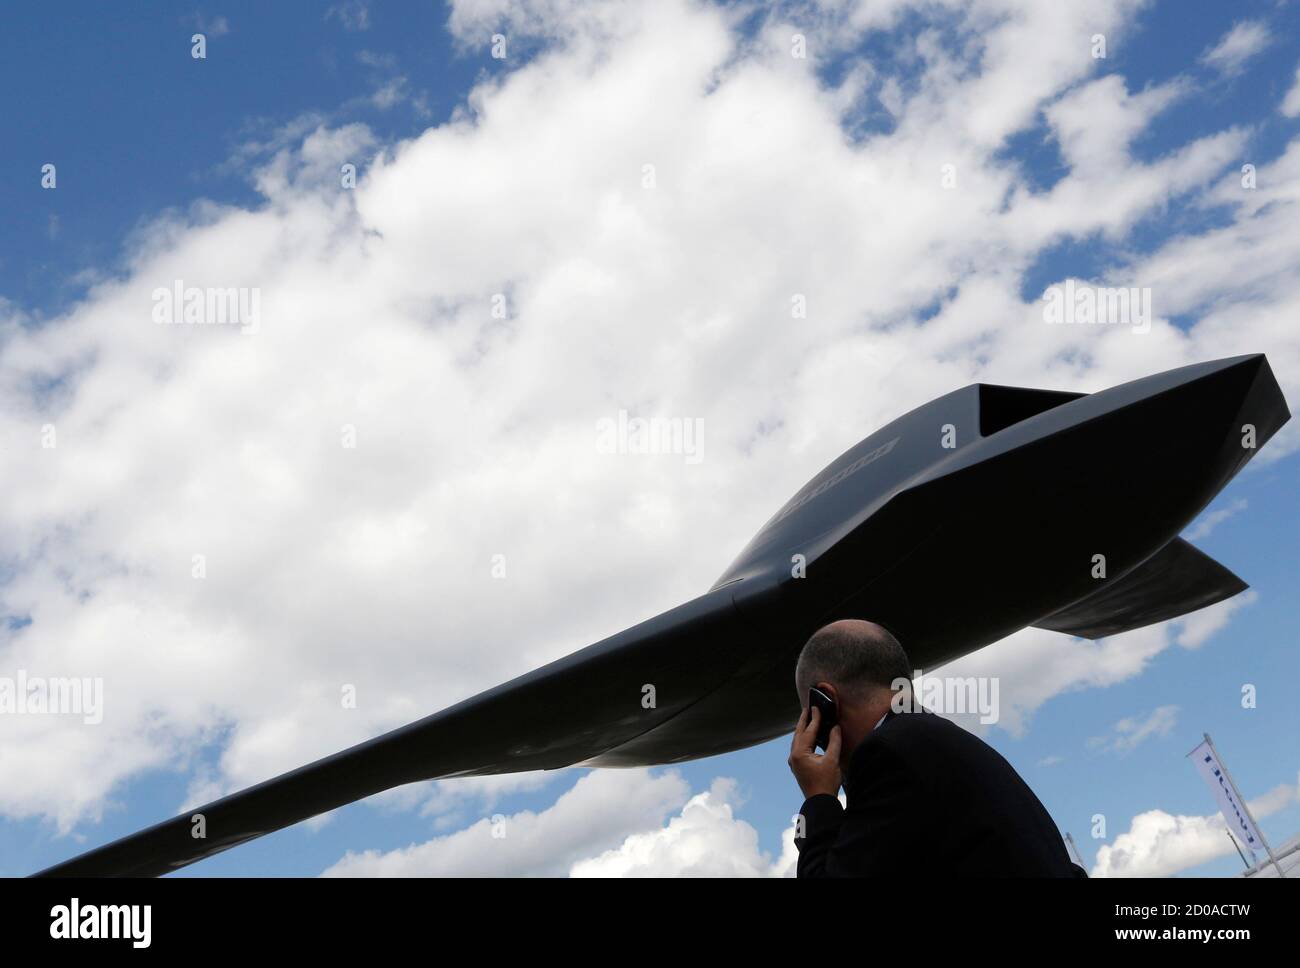 A man speaks on his phone next to a BAE Systems potential concept model of an unmanned combat system, also known as a drone, at the Farnborough Airshow in southern England July 11, 2012.  REUTERS/Luke MacGregor  (BRITAIN - Tags: TRANSPORT BUSINESS MILITARY) Stock Photo